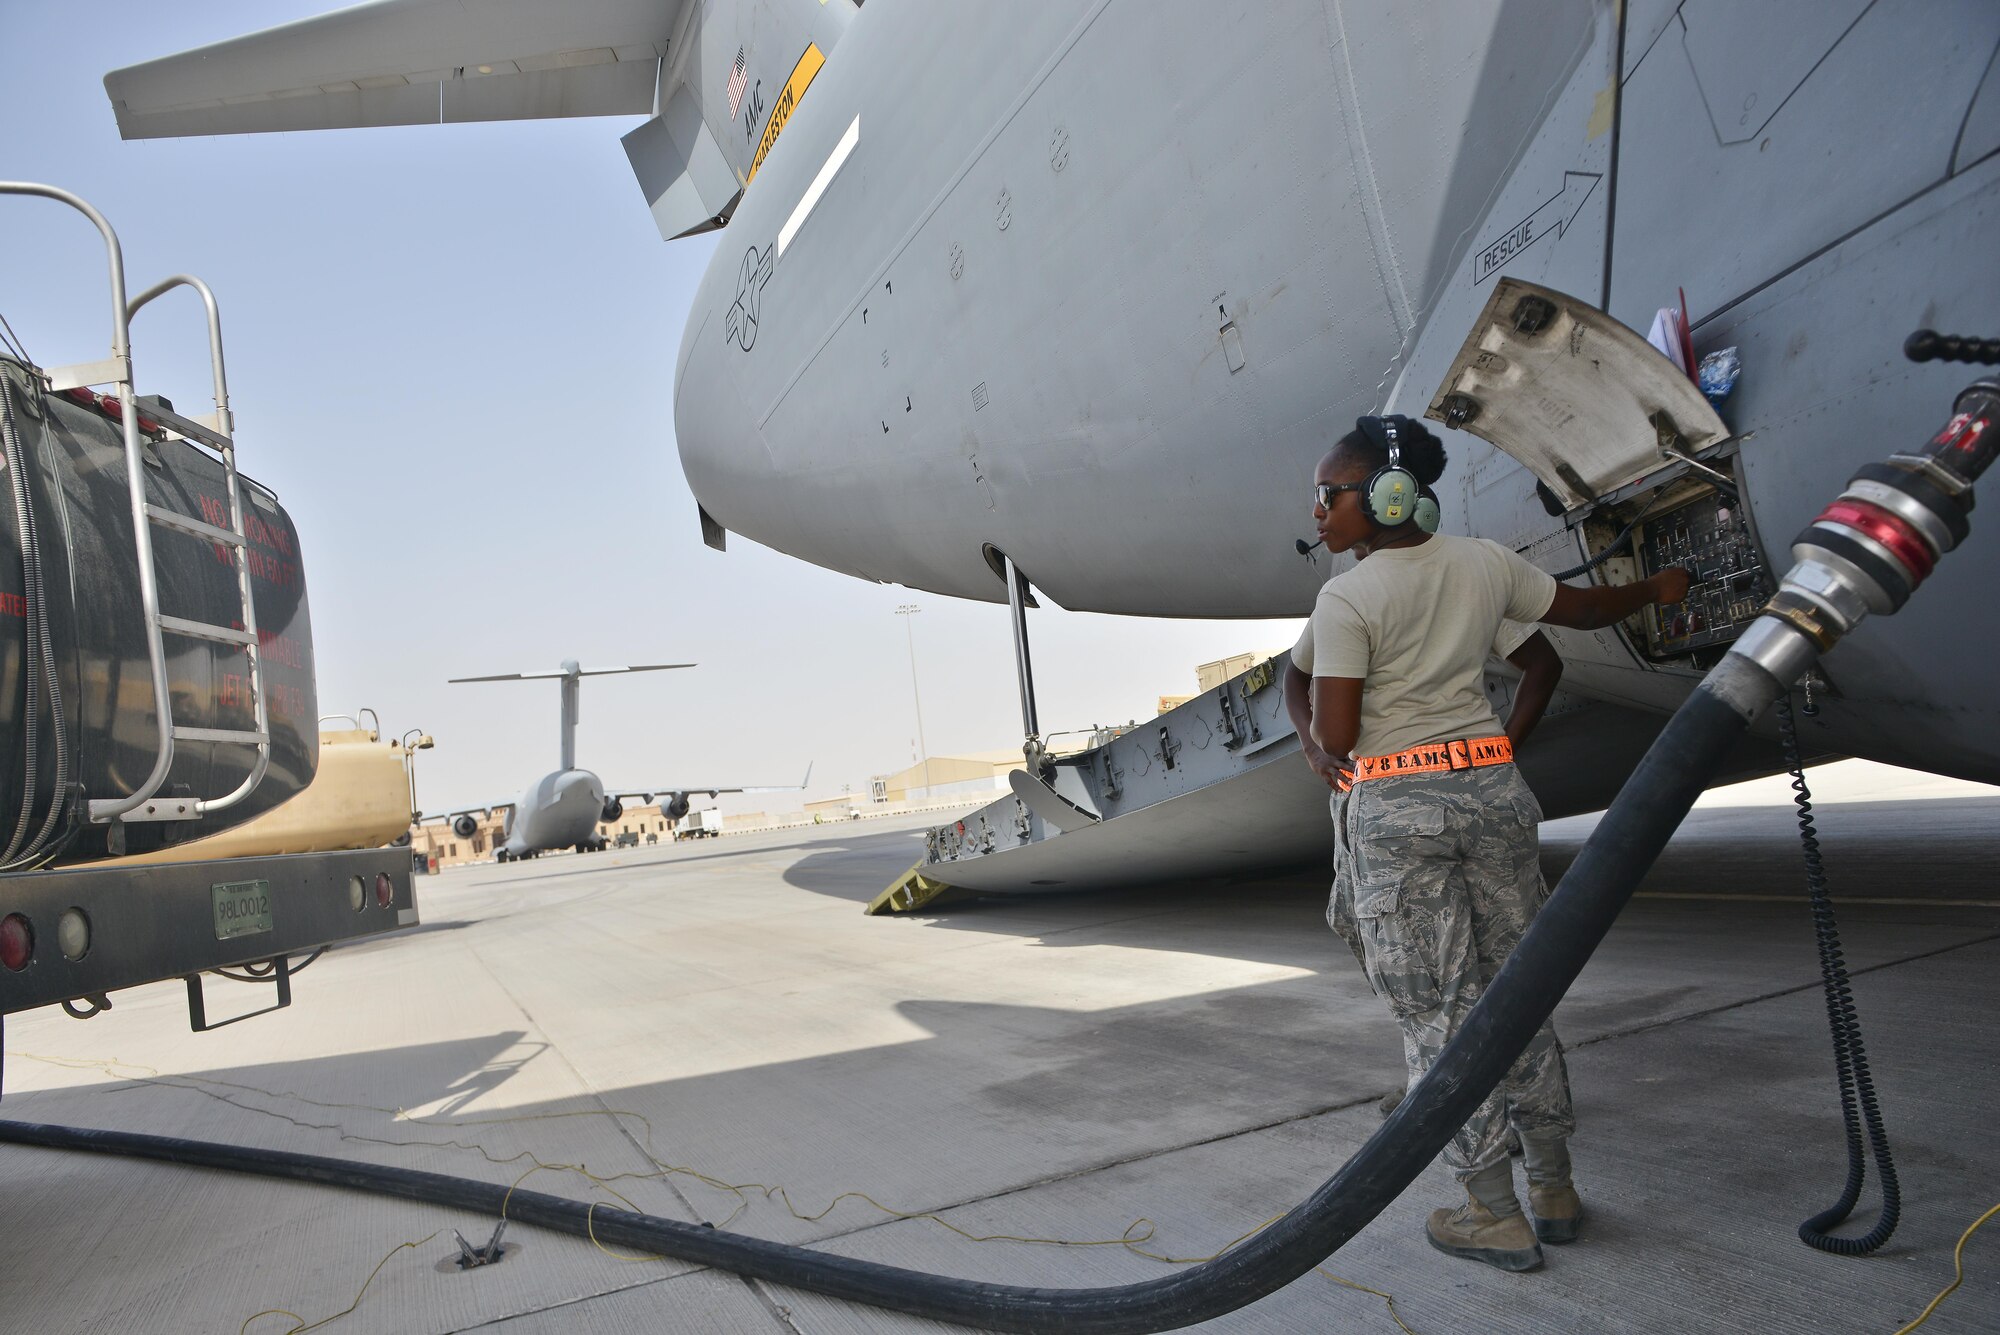 Airman 1st Class Diedre Brown, 8th Expeditionary Air Mobility Squadron, coordinates fuel shut-off for a C-17 Globemaster aircraft during pre-flight inspections May 13, 2015 at Al Udeid Air Base, Qatar. Airmen from separate squadrons deployed to Al Udeid helped support a mission for forward deployed members of RED HORSE Civil Engineering to repair a runway in Southwest Asia in support of Operation Inherent Resolve. (U.S. Air Force photo/Staff Sgt. Alexandre Montes)